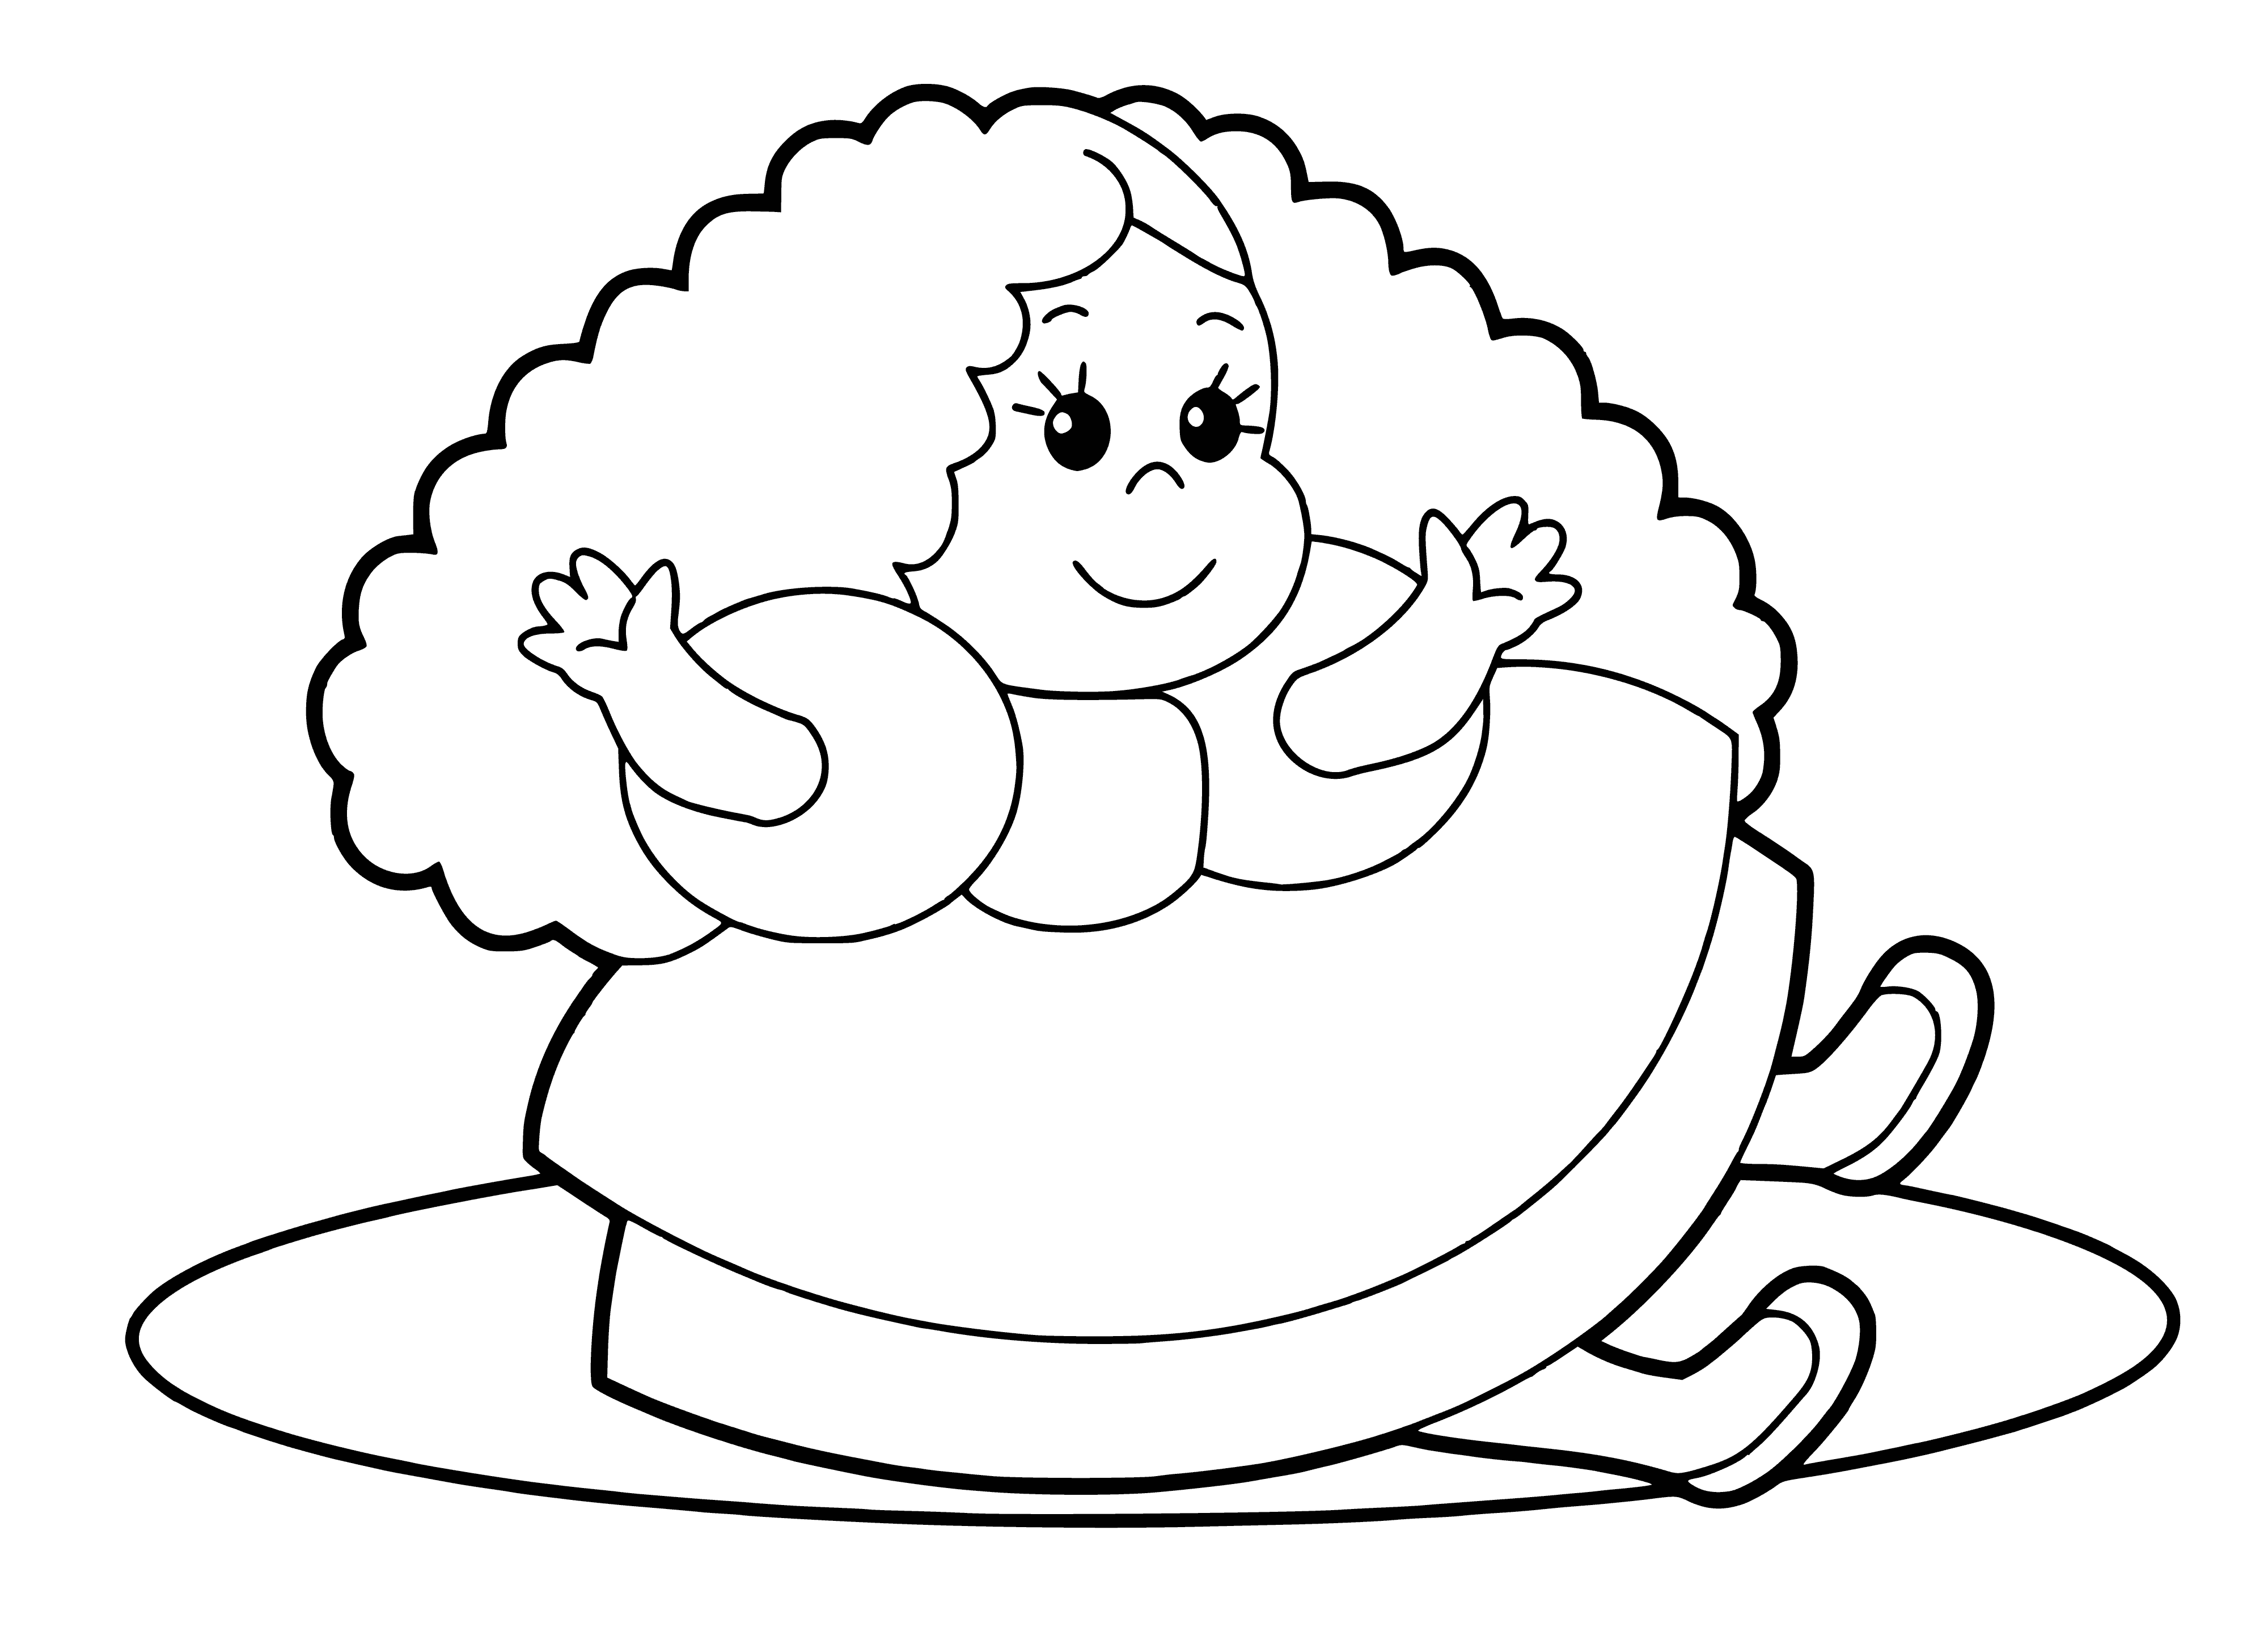 coloring page: Smiling girl in white dress with blue ribbon holds a white bear. Blonde ponytail. Happy and content.